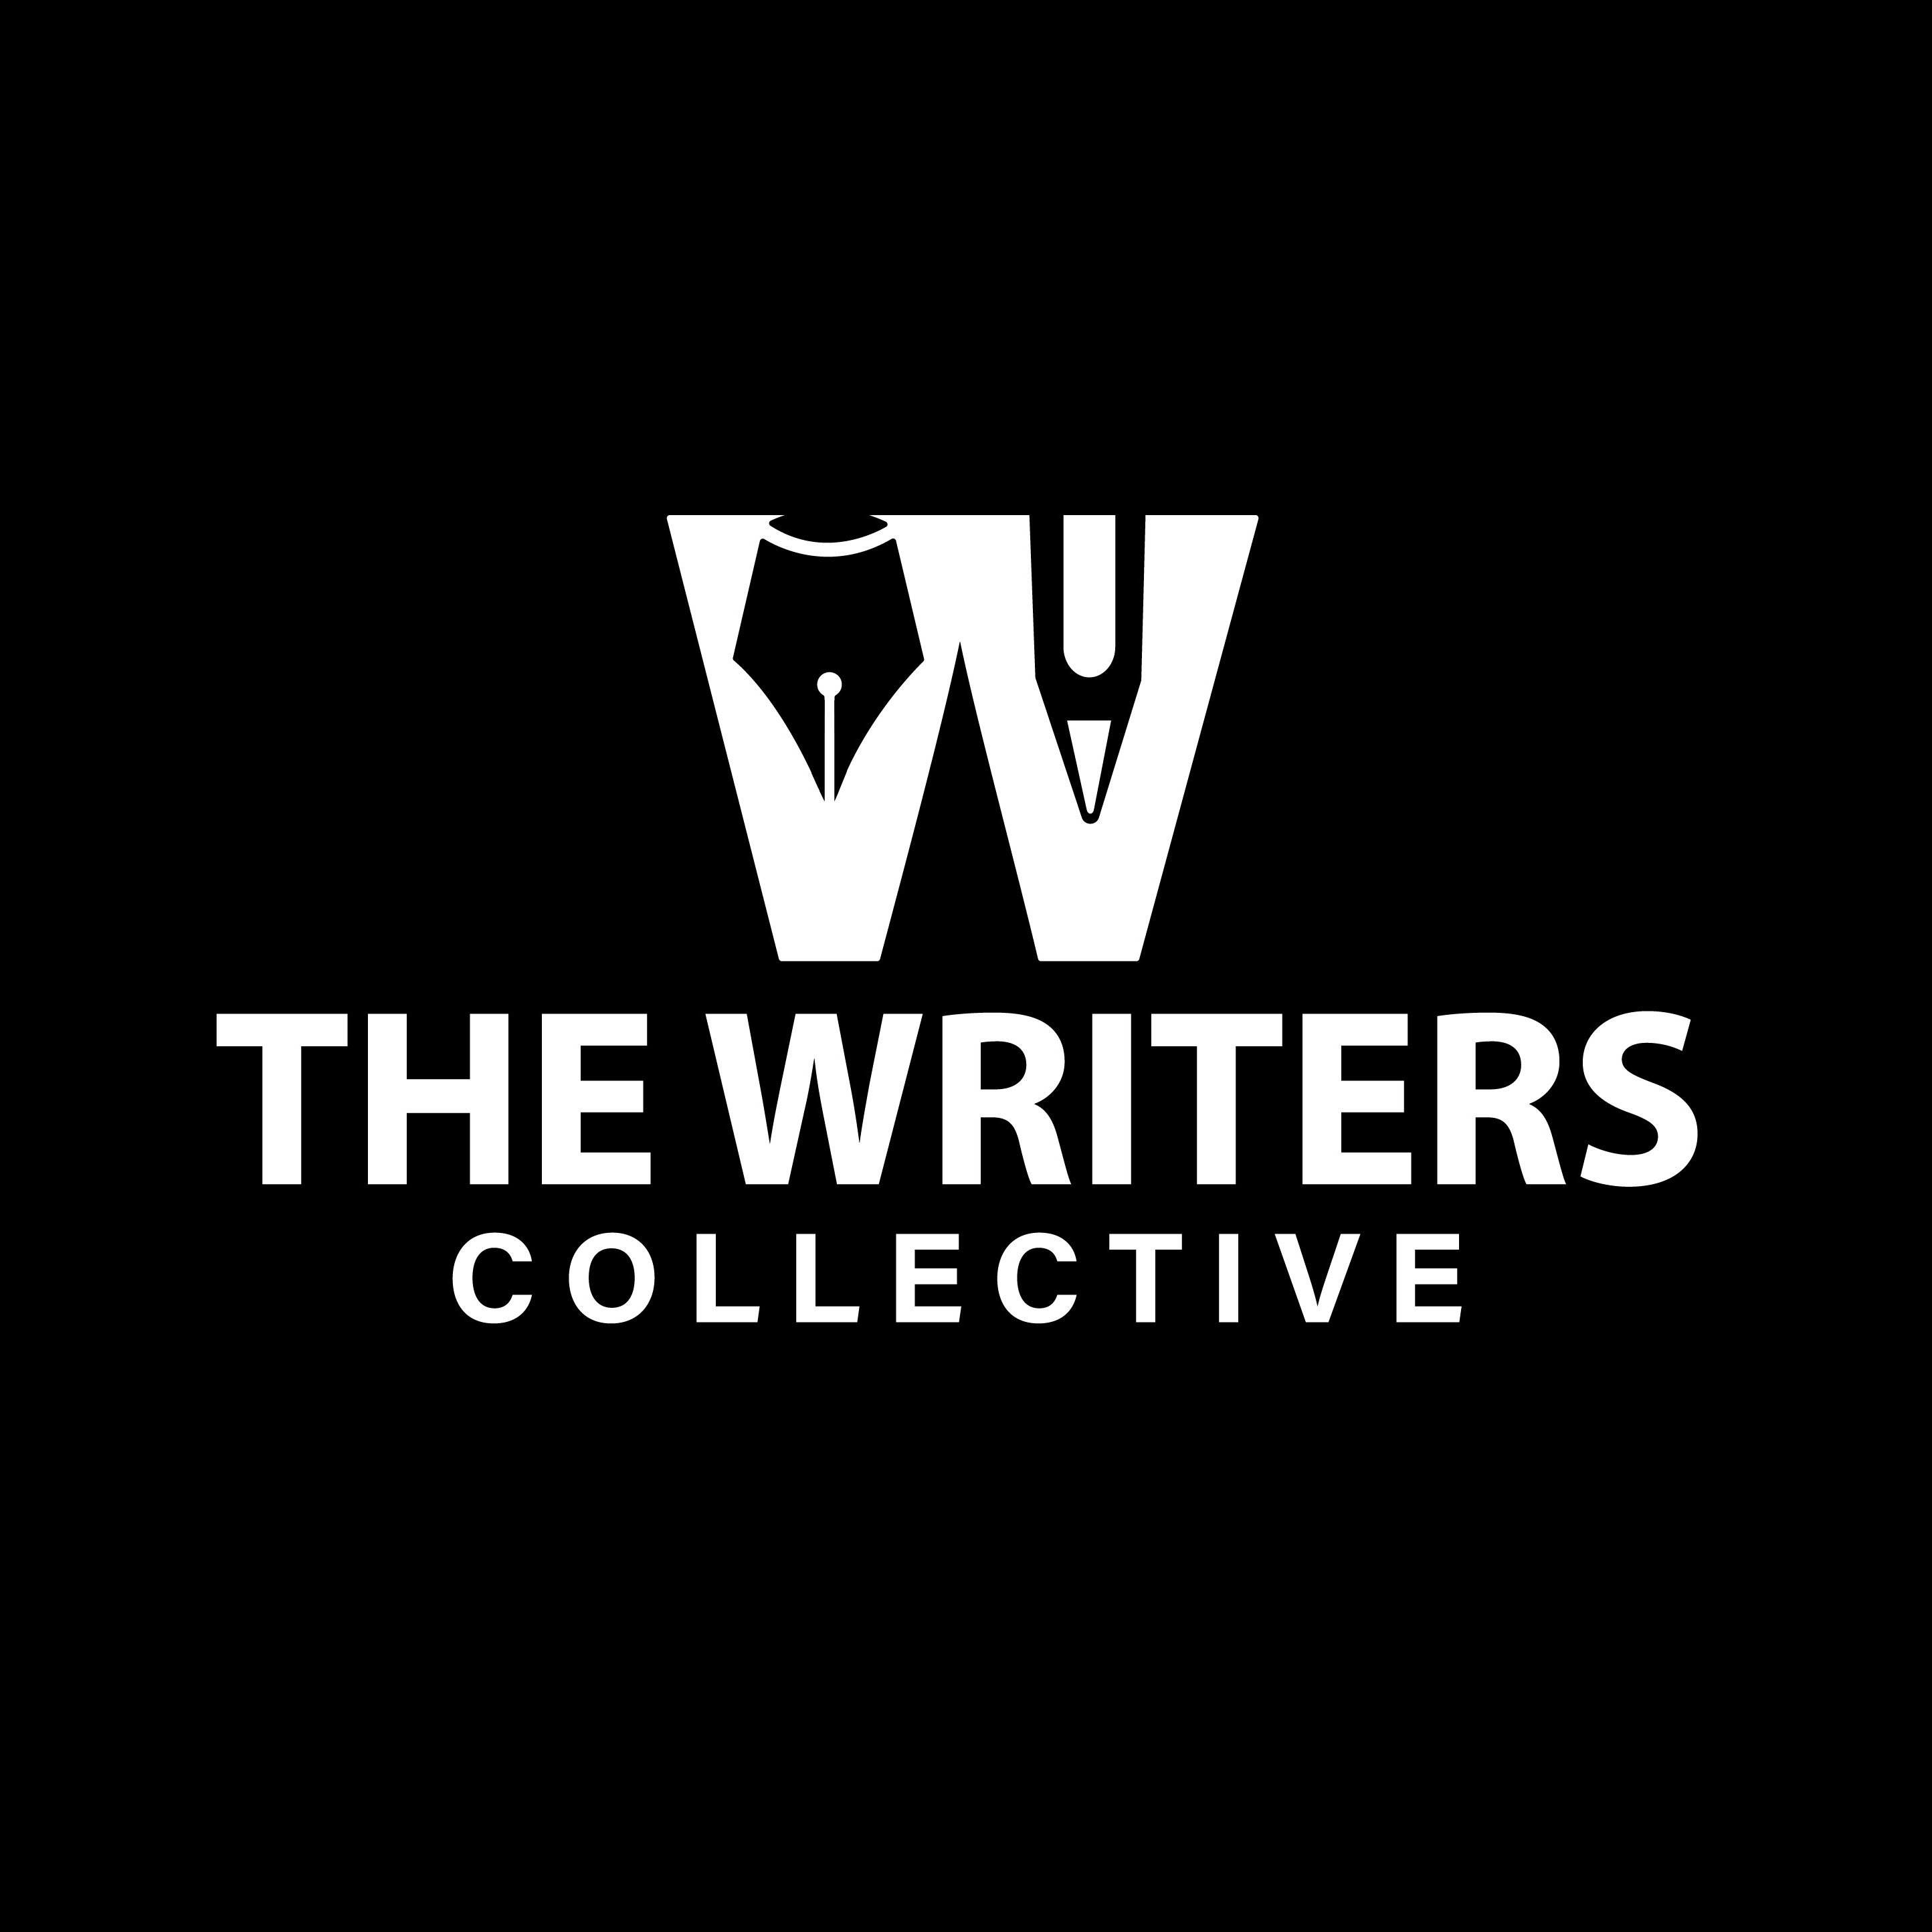 We are a community of authors and professional writers who organise events, review books and host a digital directory of writers & services to support projects